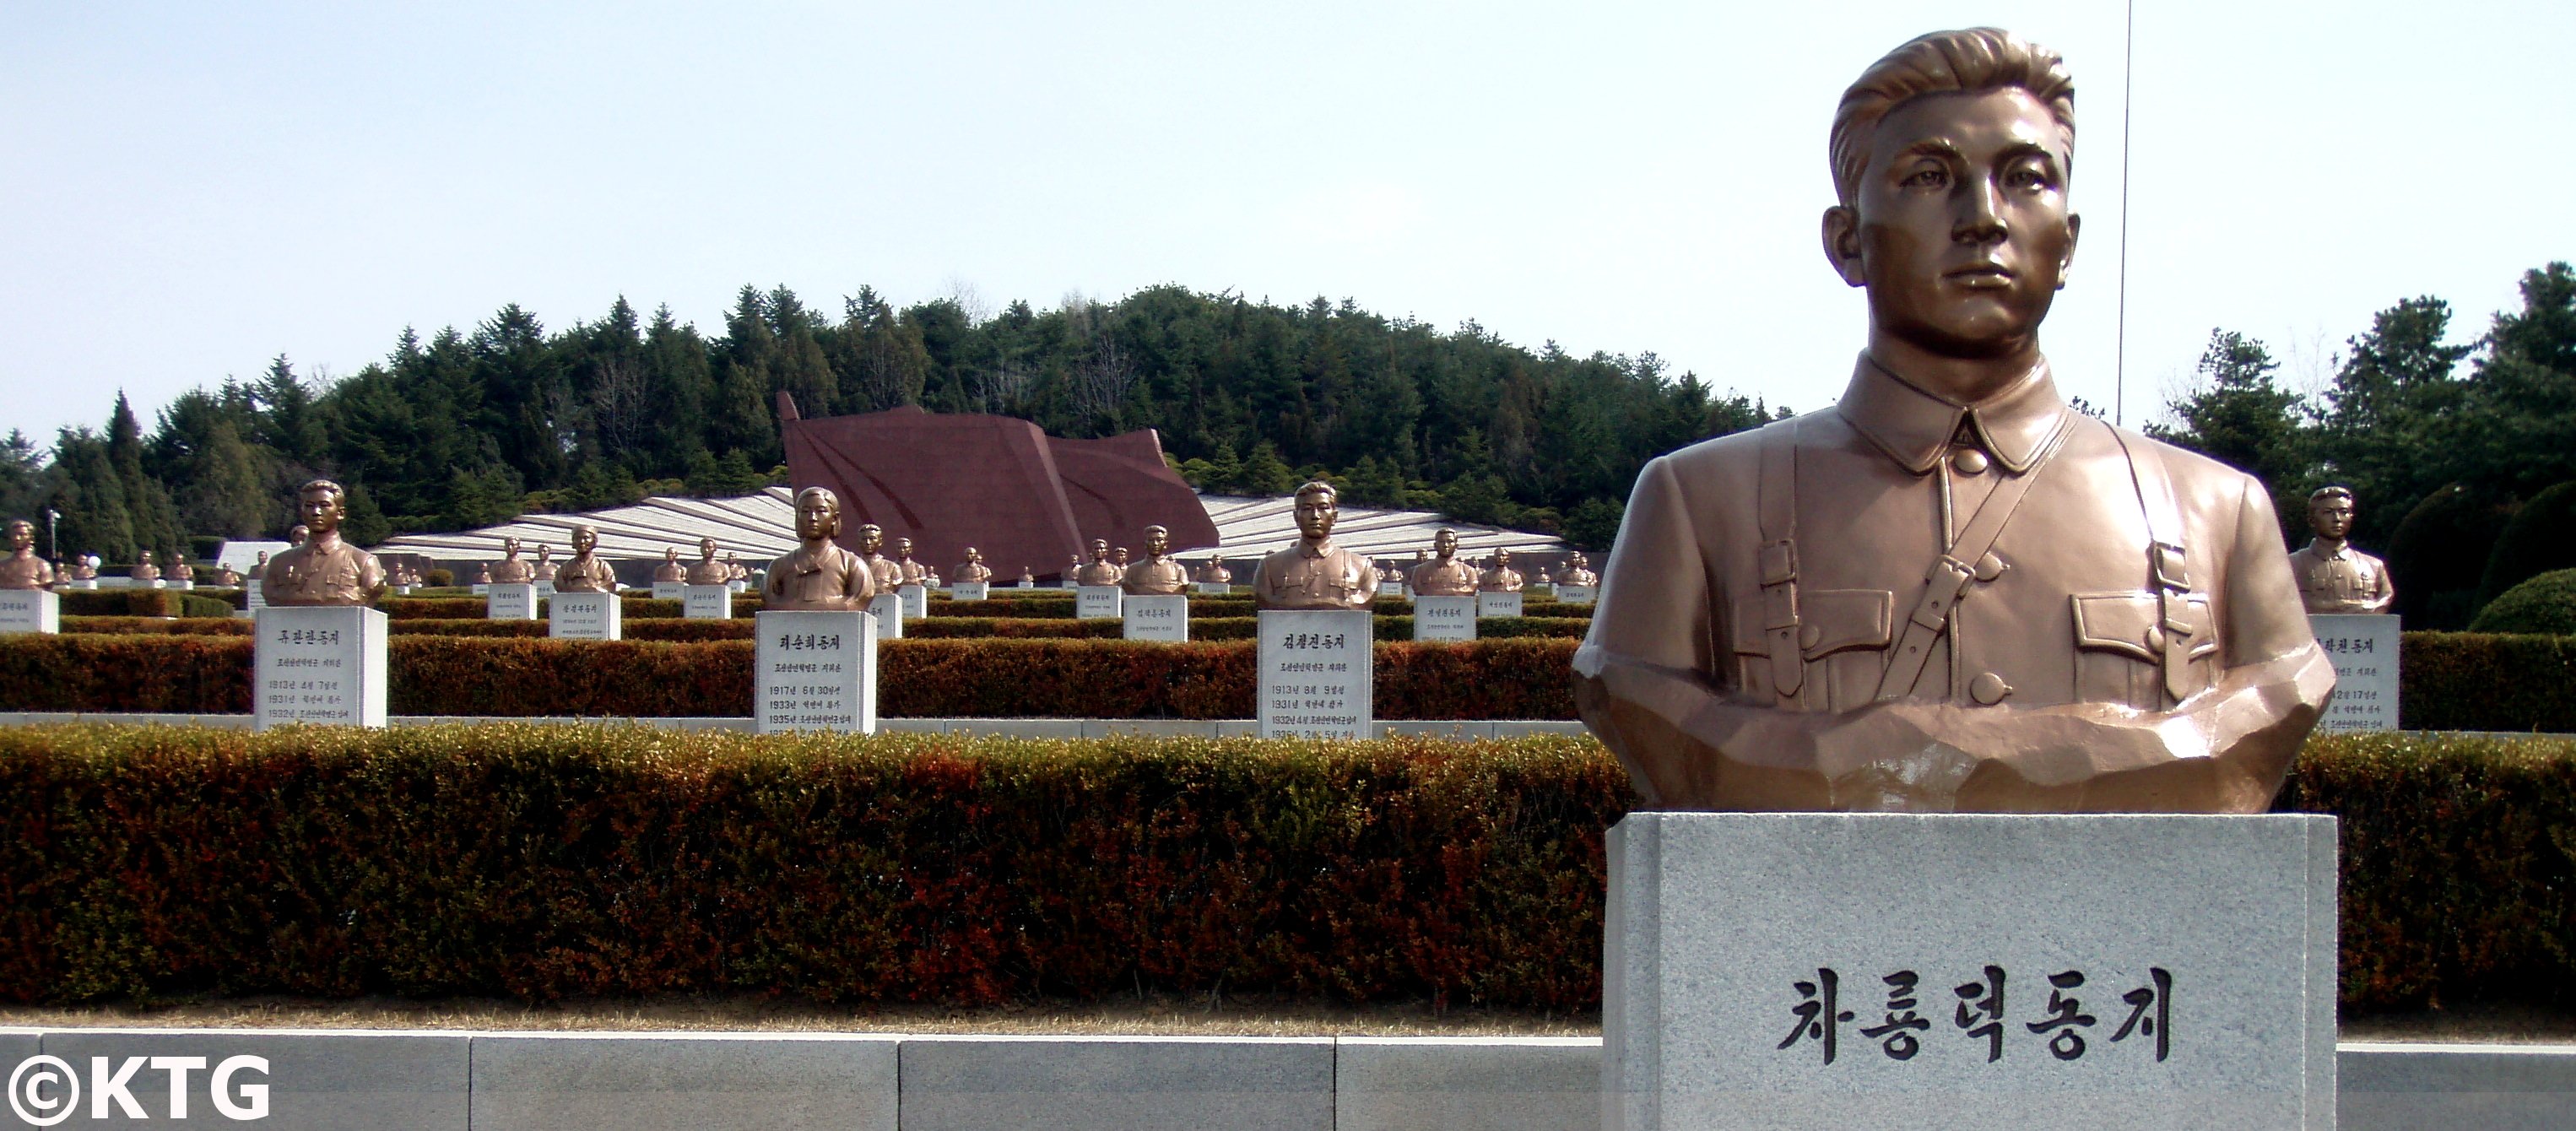 Revolutionary Martyrs' Cemetery in Pyongyang capital of North Korea has busts of national heroes who dedicated their lives to fighting against the Japanese. Picture taken by KTG Tours